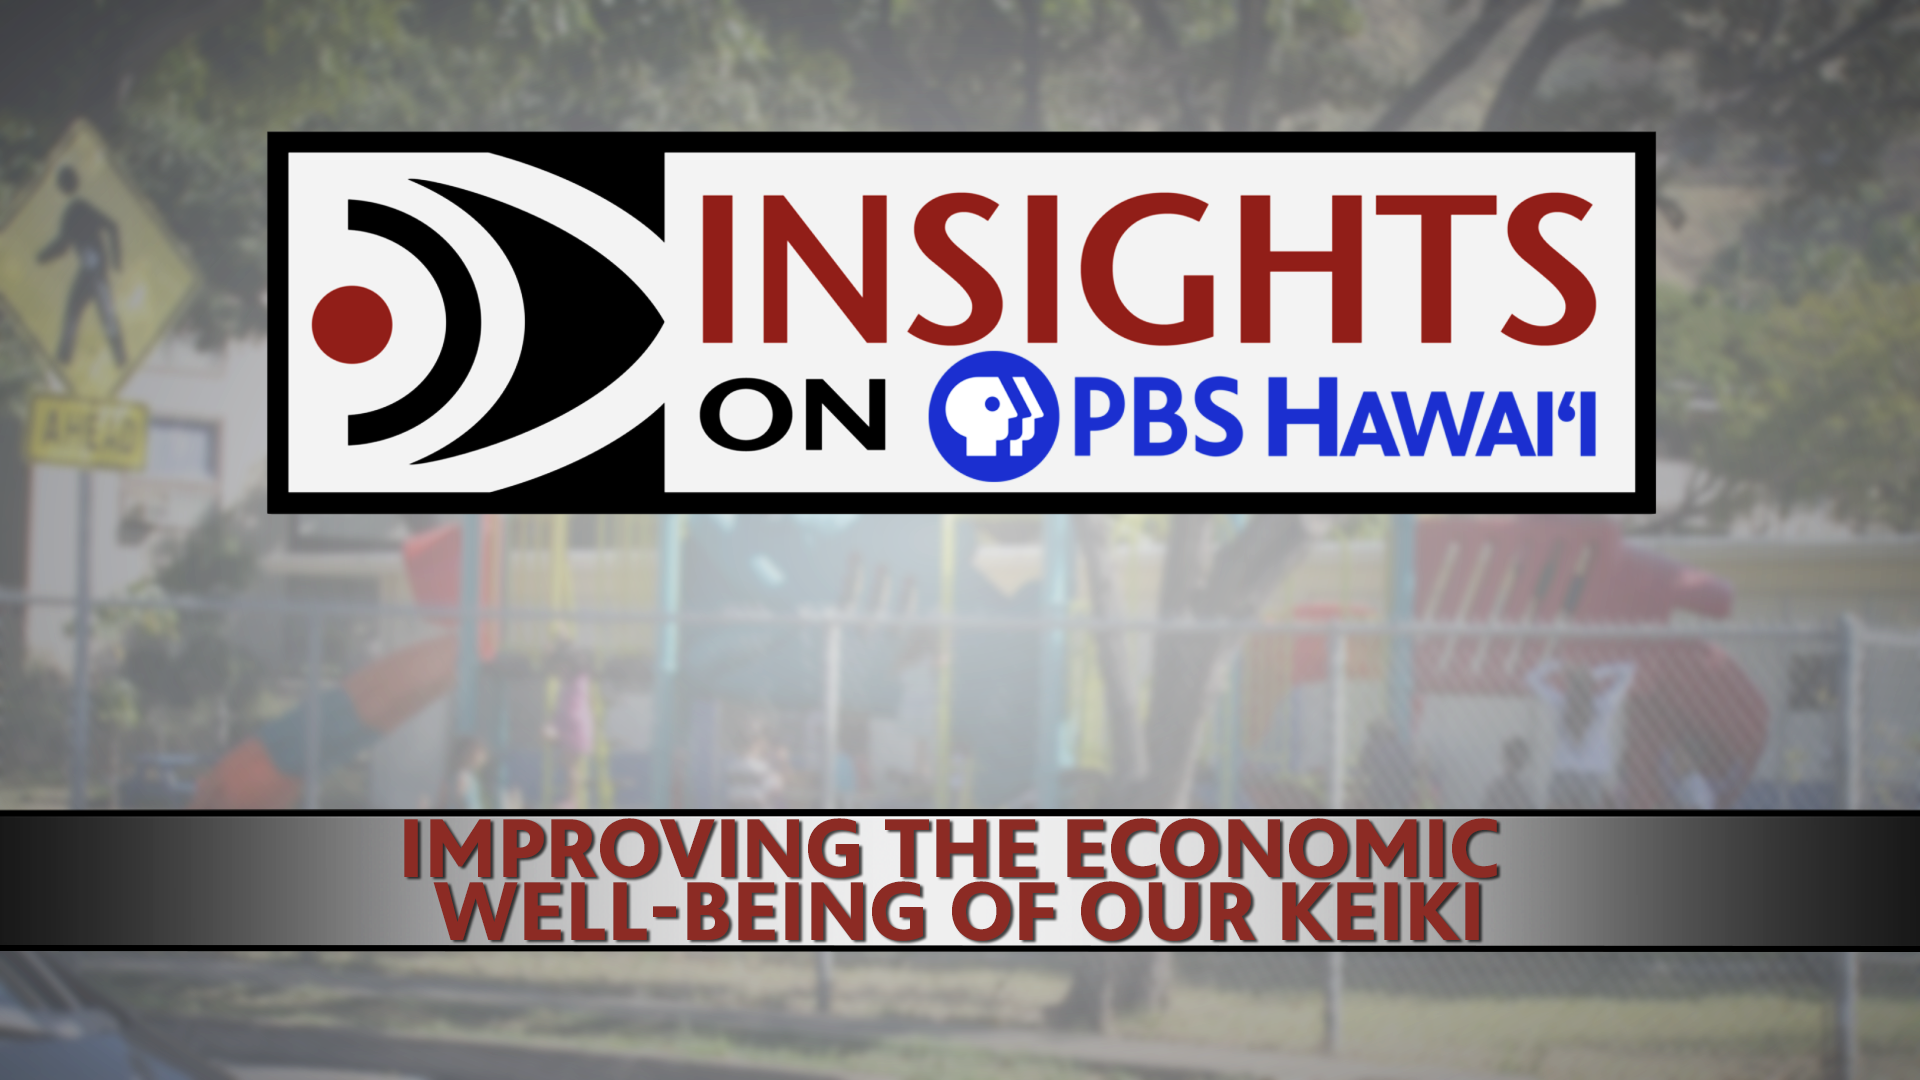 INSIGHTS ON PBS HAWAIʻI <br/>Improving the Economic Well-Being of Our Keiki